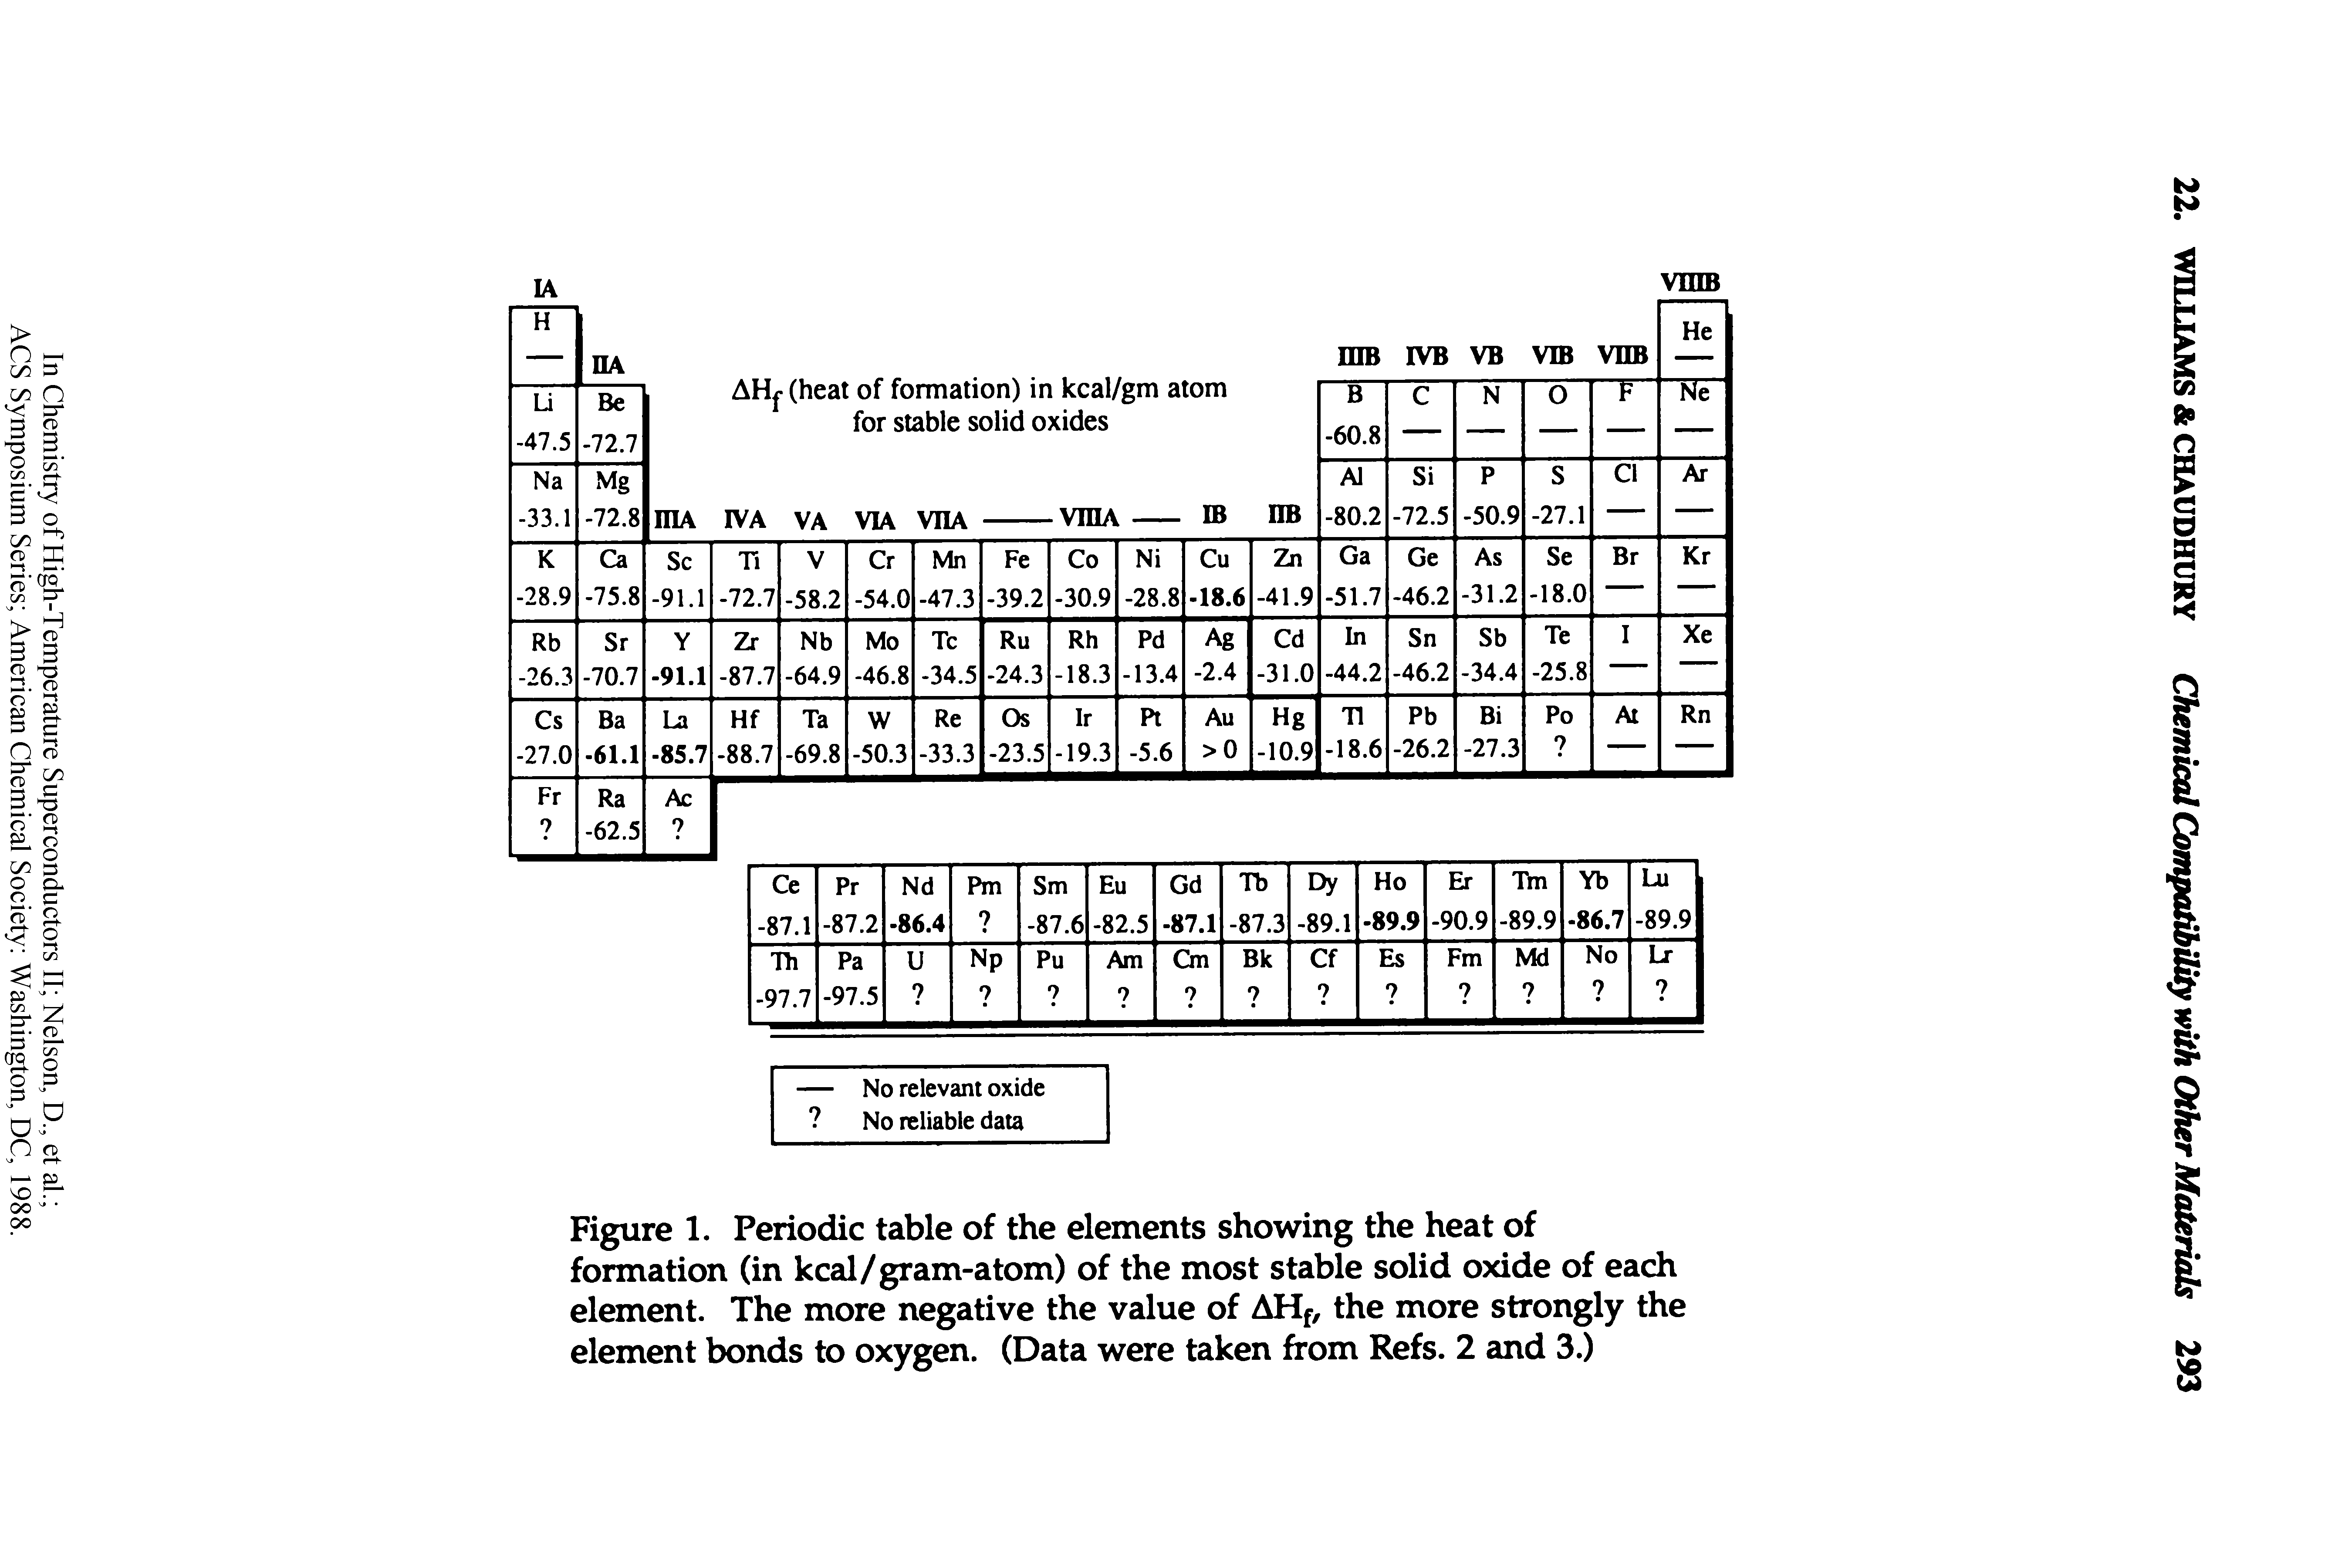 Figure 1. Periodic table of the elements showing the heat of formation (in kcal/gram-atom) of the most stable solid oxide of each element. The more negative the value of AHf, the more strongly the element bonds to oxygen. (Data were taken from Refs. 2 and 3.)...